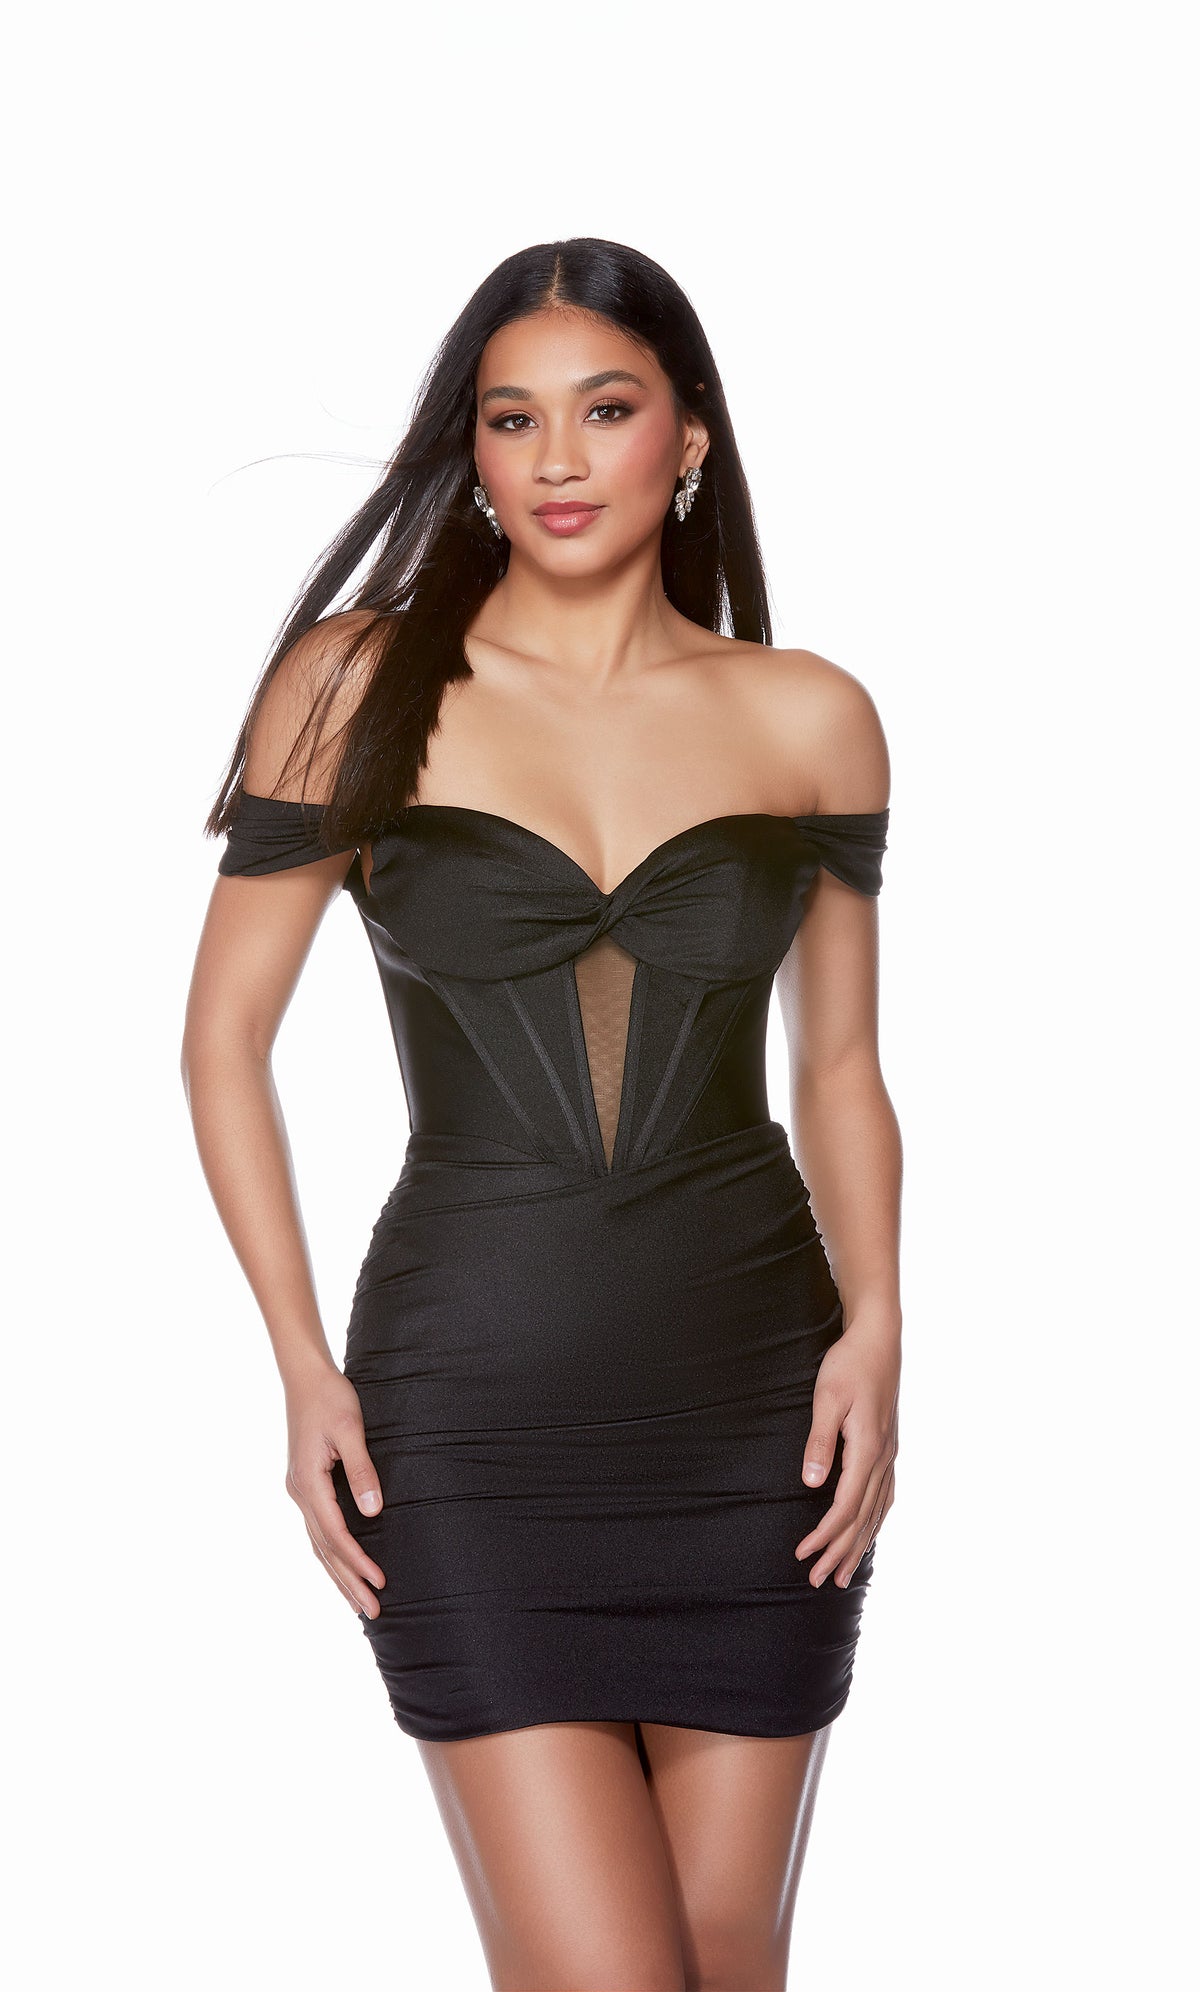 An elegant, off-the-shoulder corset dress in a classic black, perfect for a glamorous night out. Check out our latest collection of gorgeous designer dresses by ALYCE Paris.